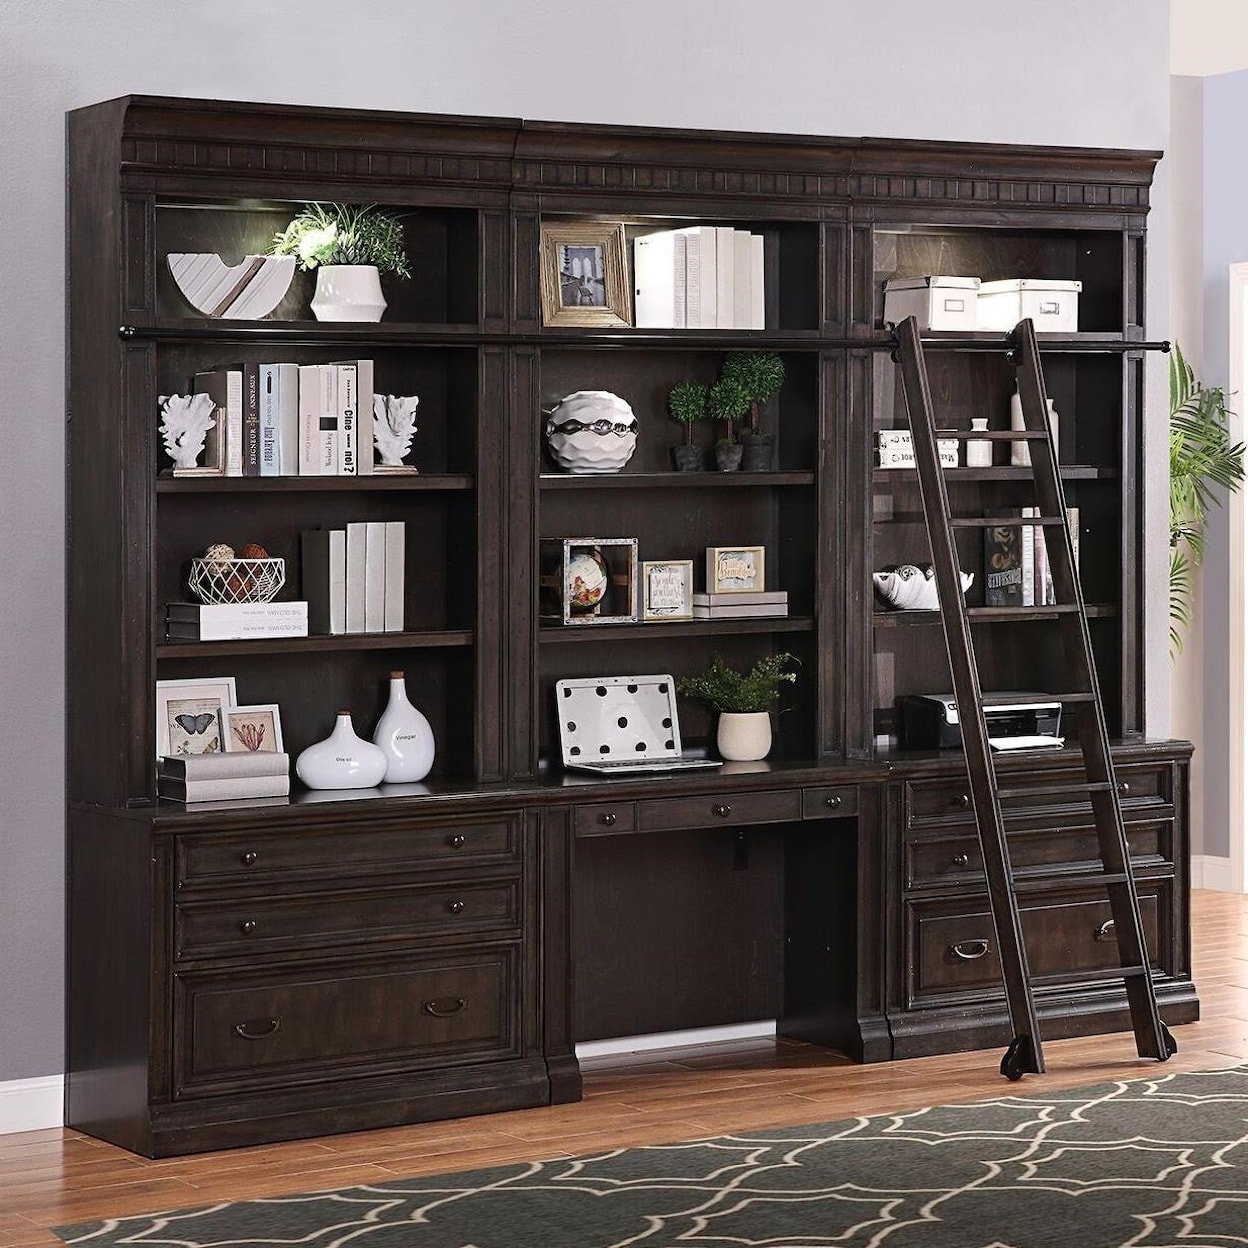 Parker House Washington Heights Bookcase Wall Unit